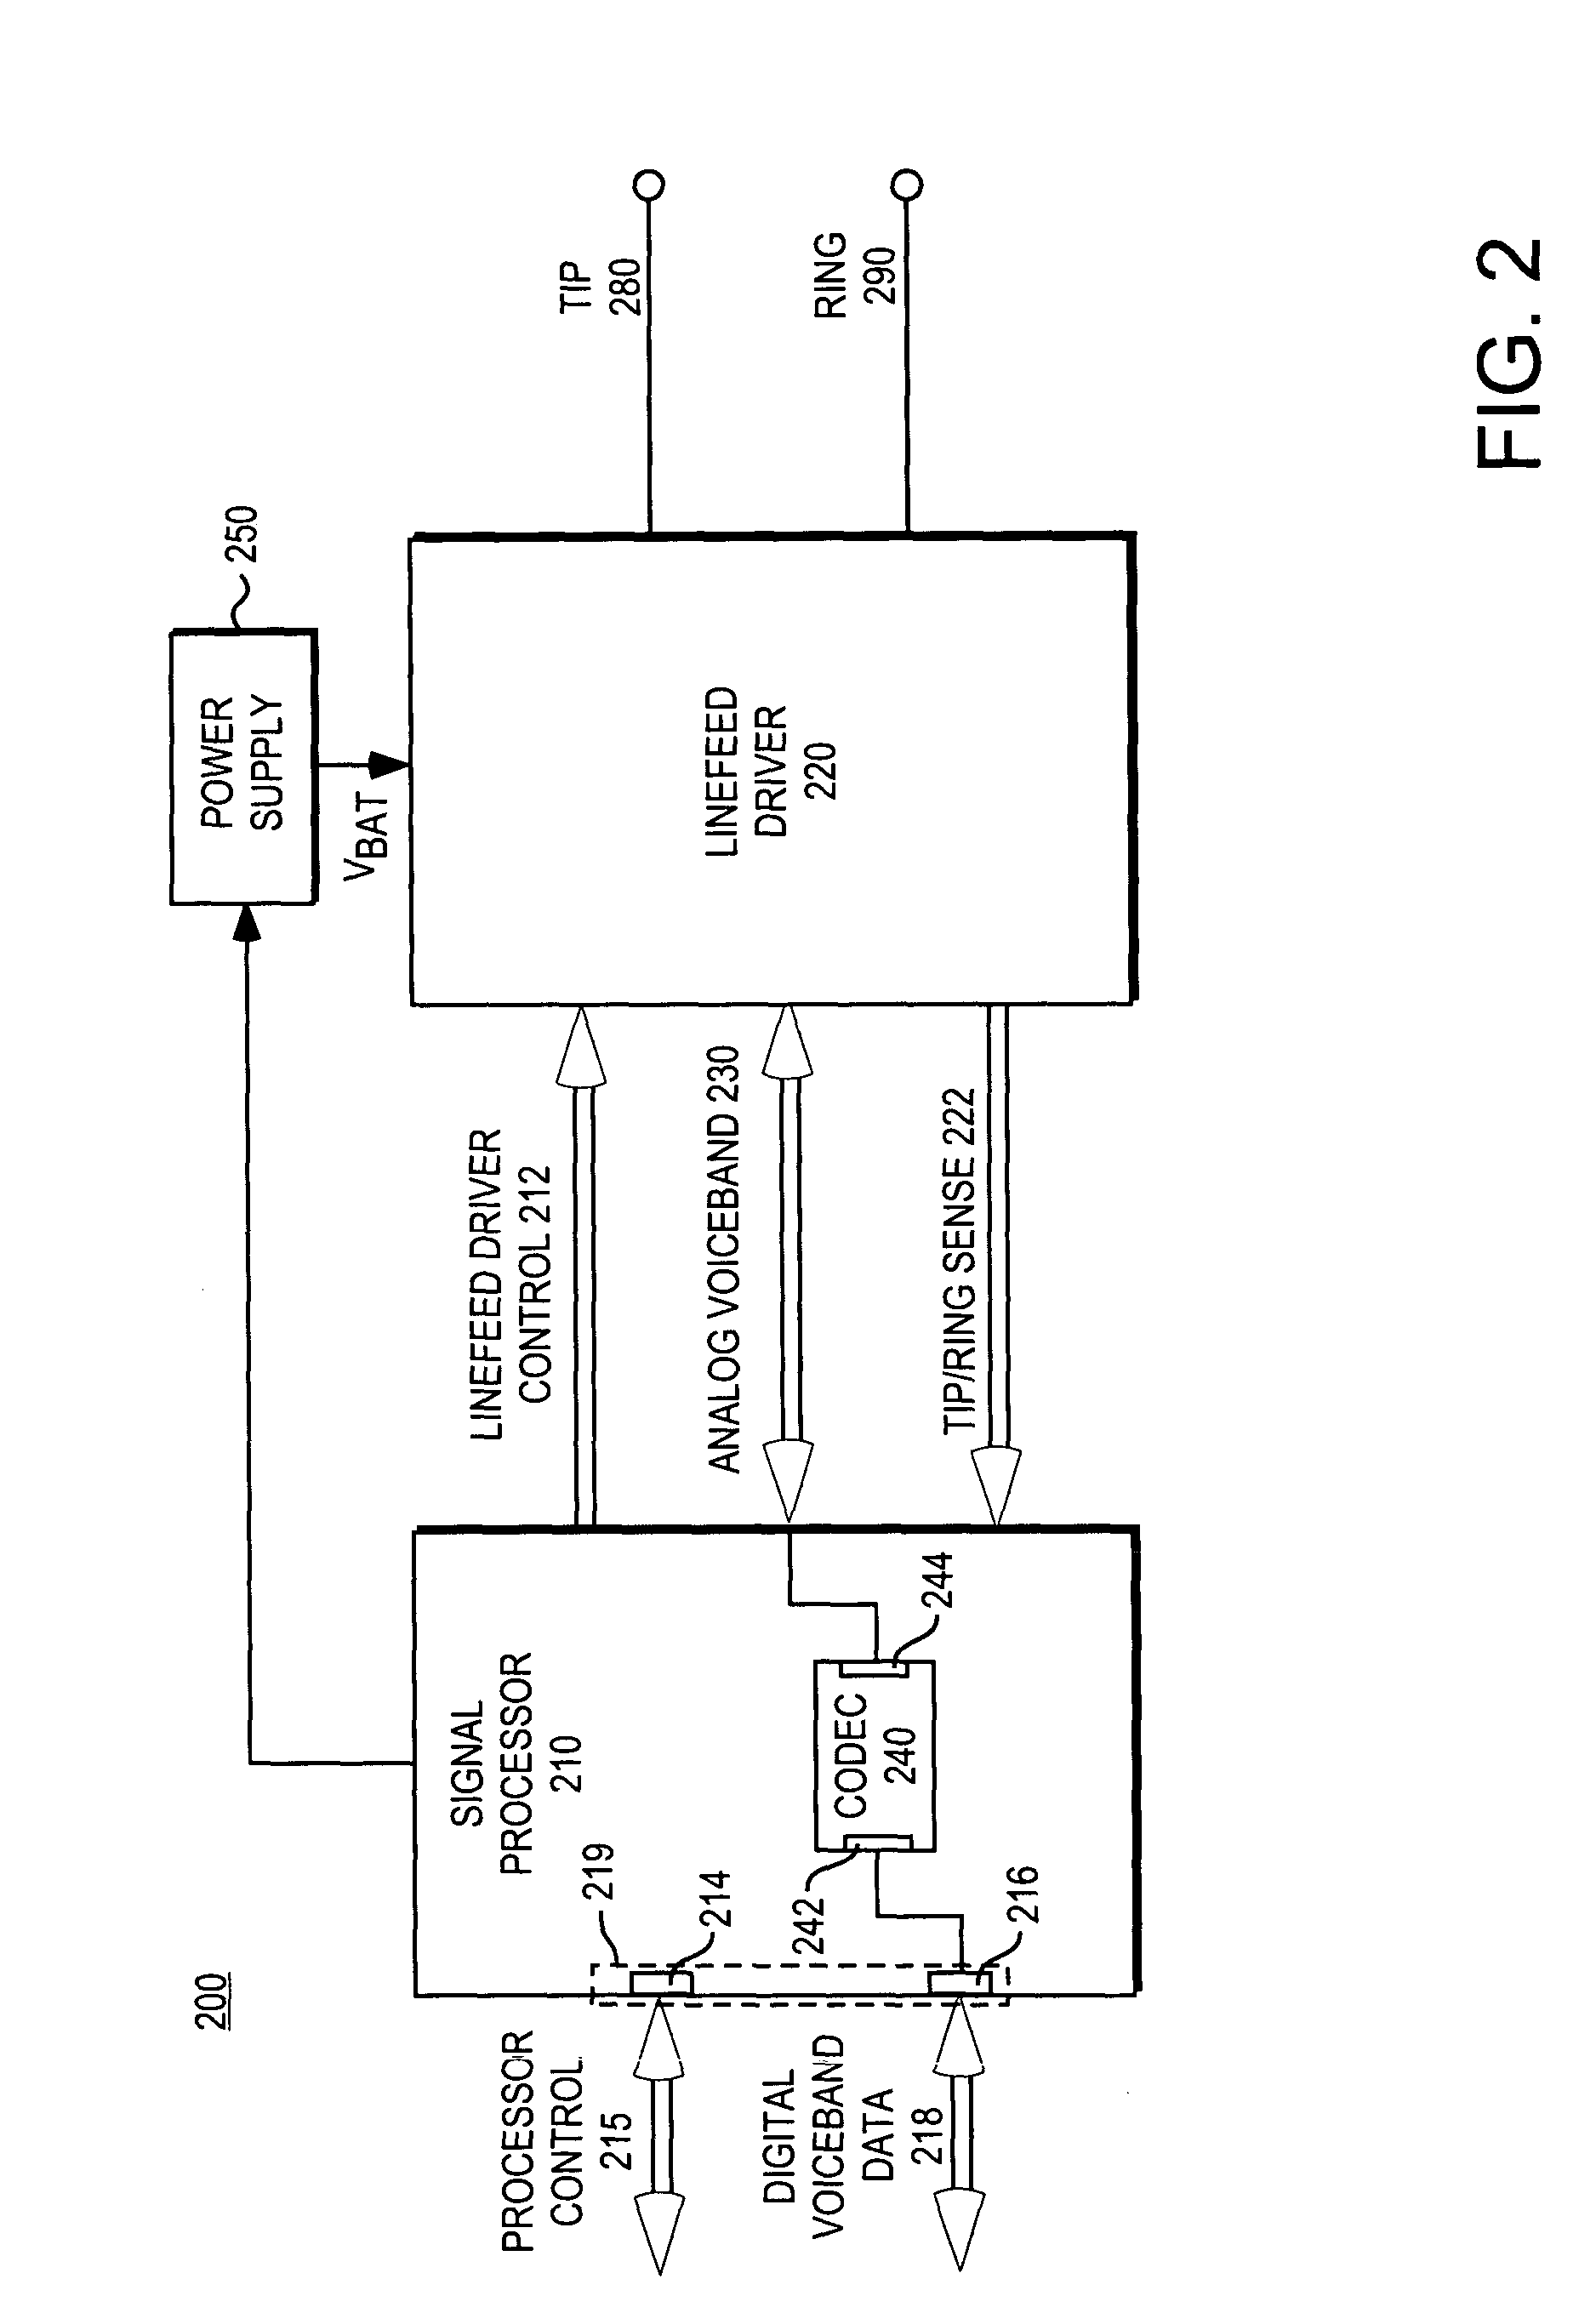 Direct drive for a subscriber line differential ringing signal having a DC offset